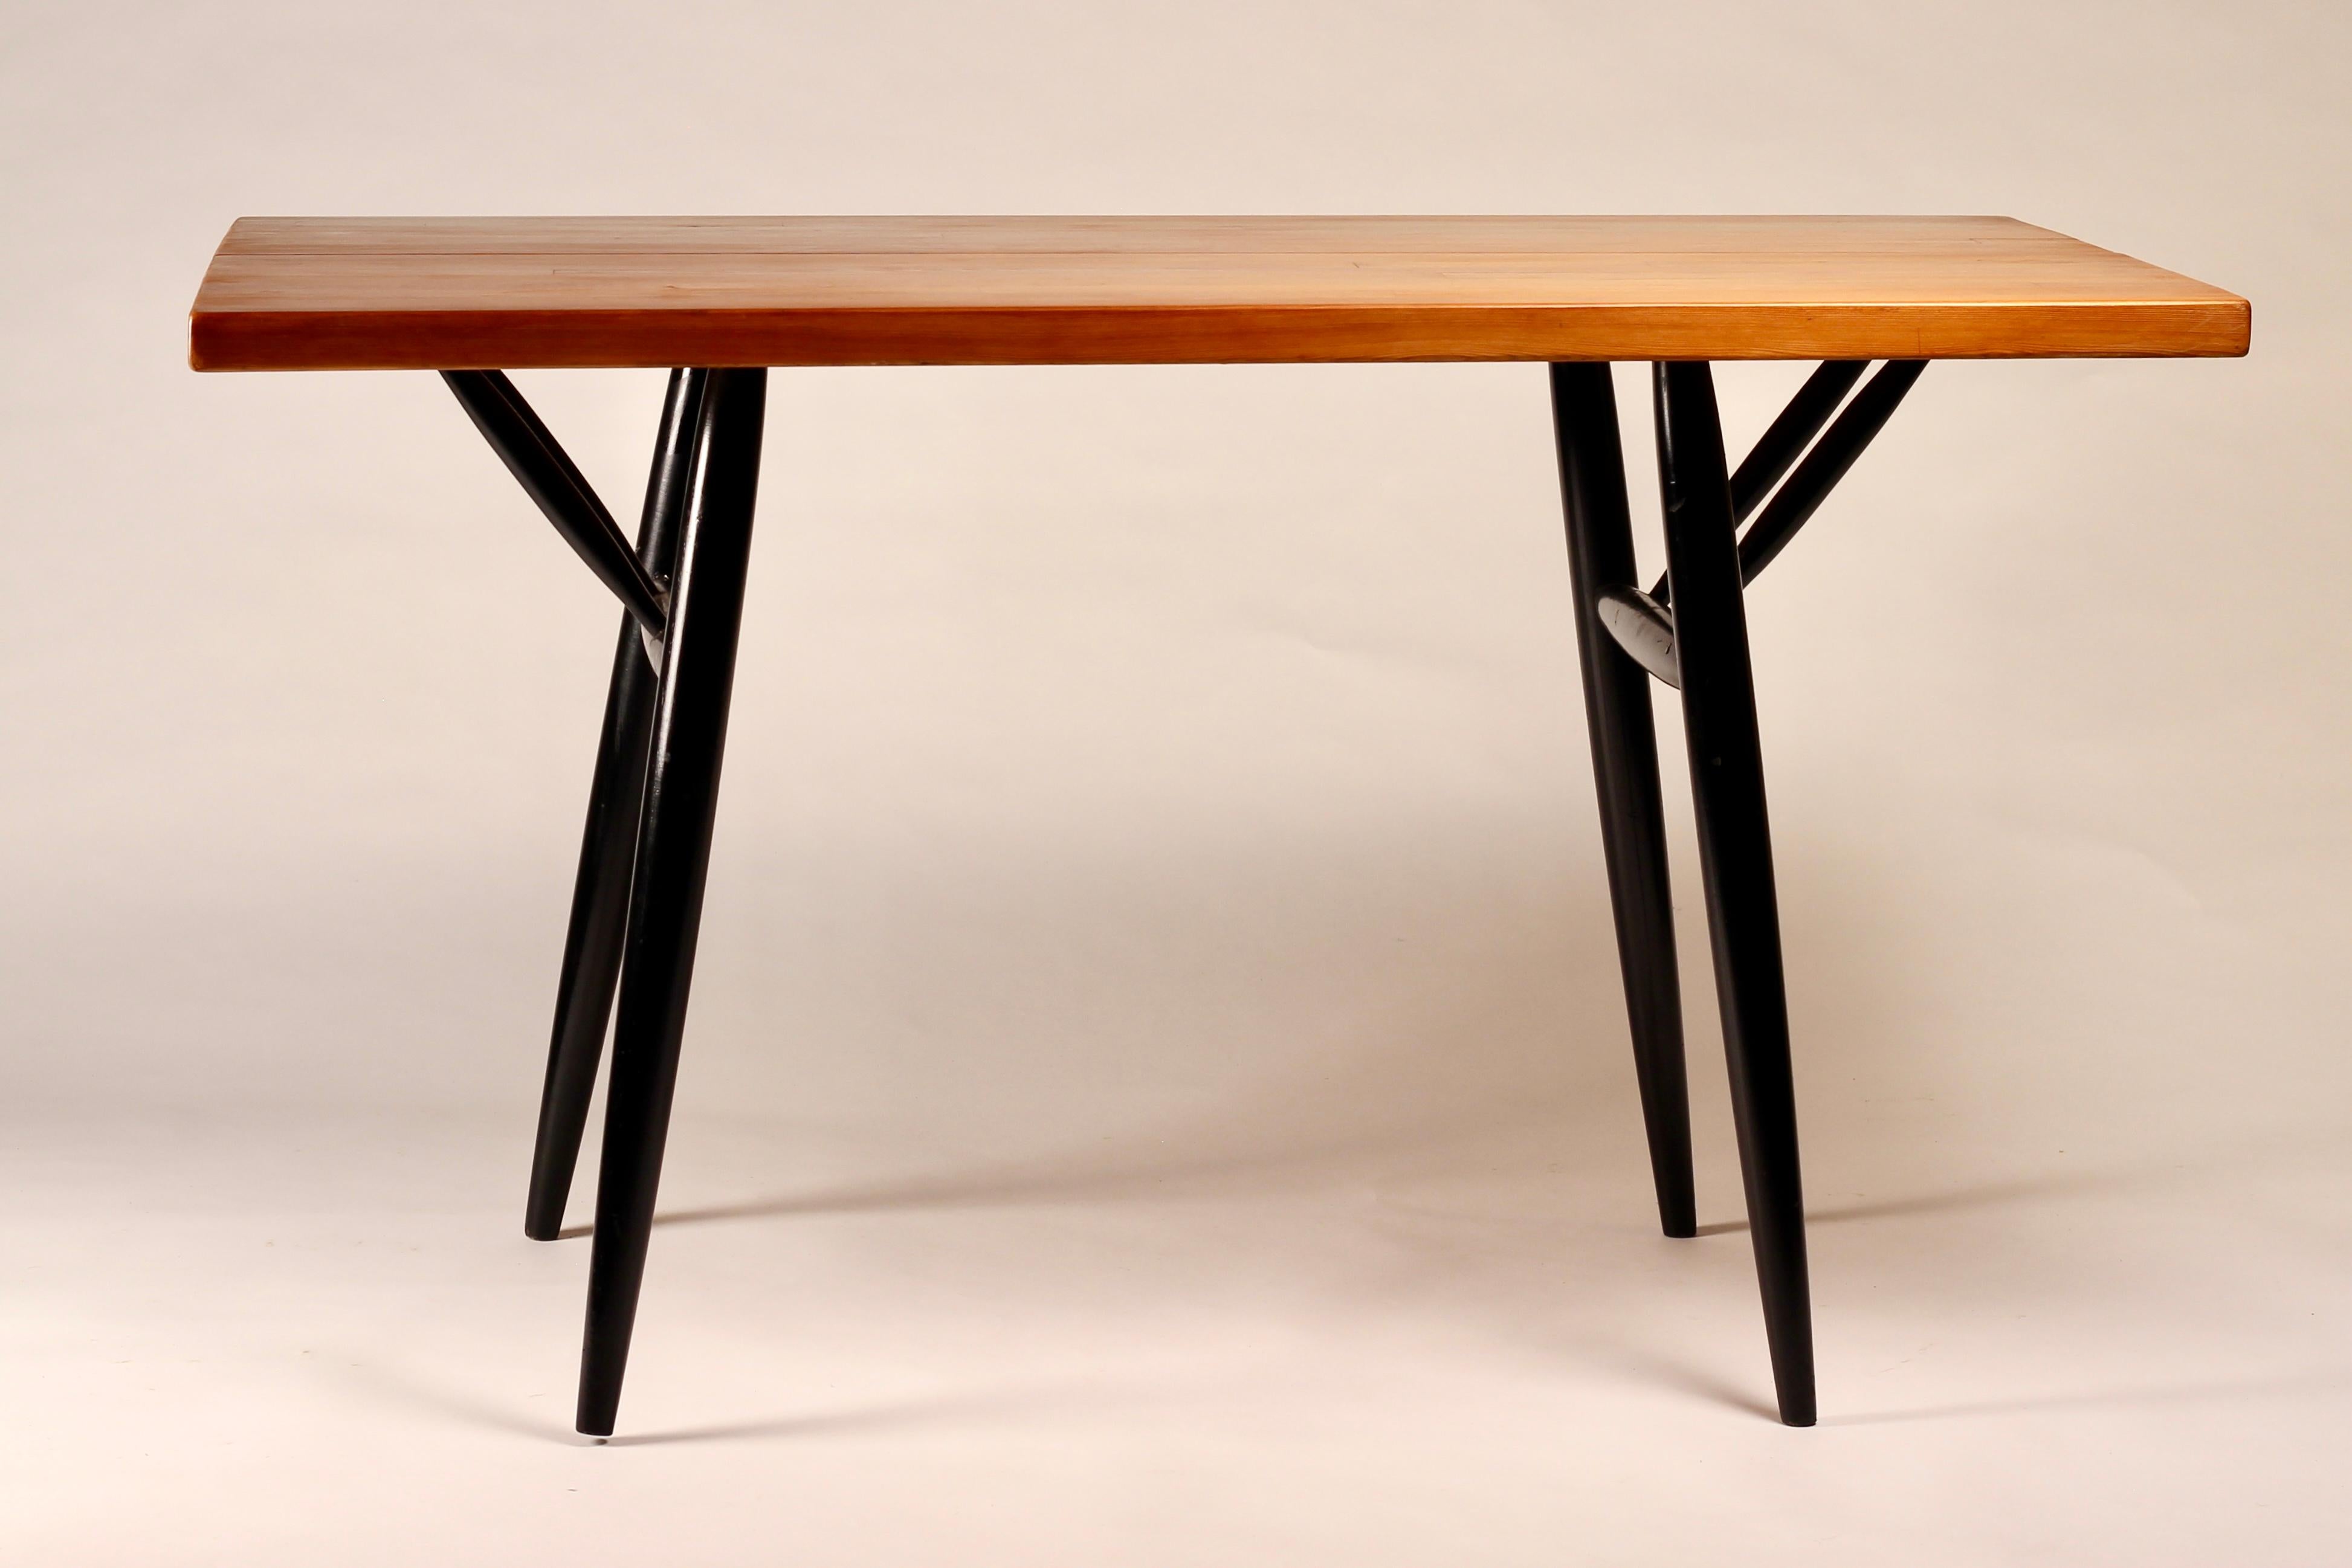 An original and early Ilmari Tapiovaara 'Pirkka' dining Table made from ebonised beech and pine by Laukaan Puu in Finland. 

Designed in 1955, The 'Pirkka' series was produced between 1955-1962. Here, Tapiovaara combines his experience with